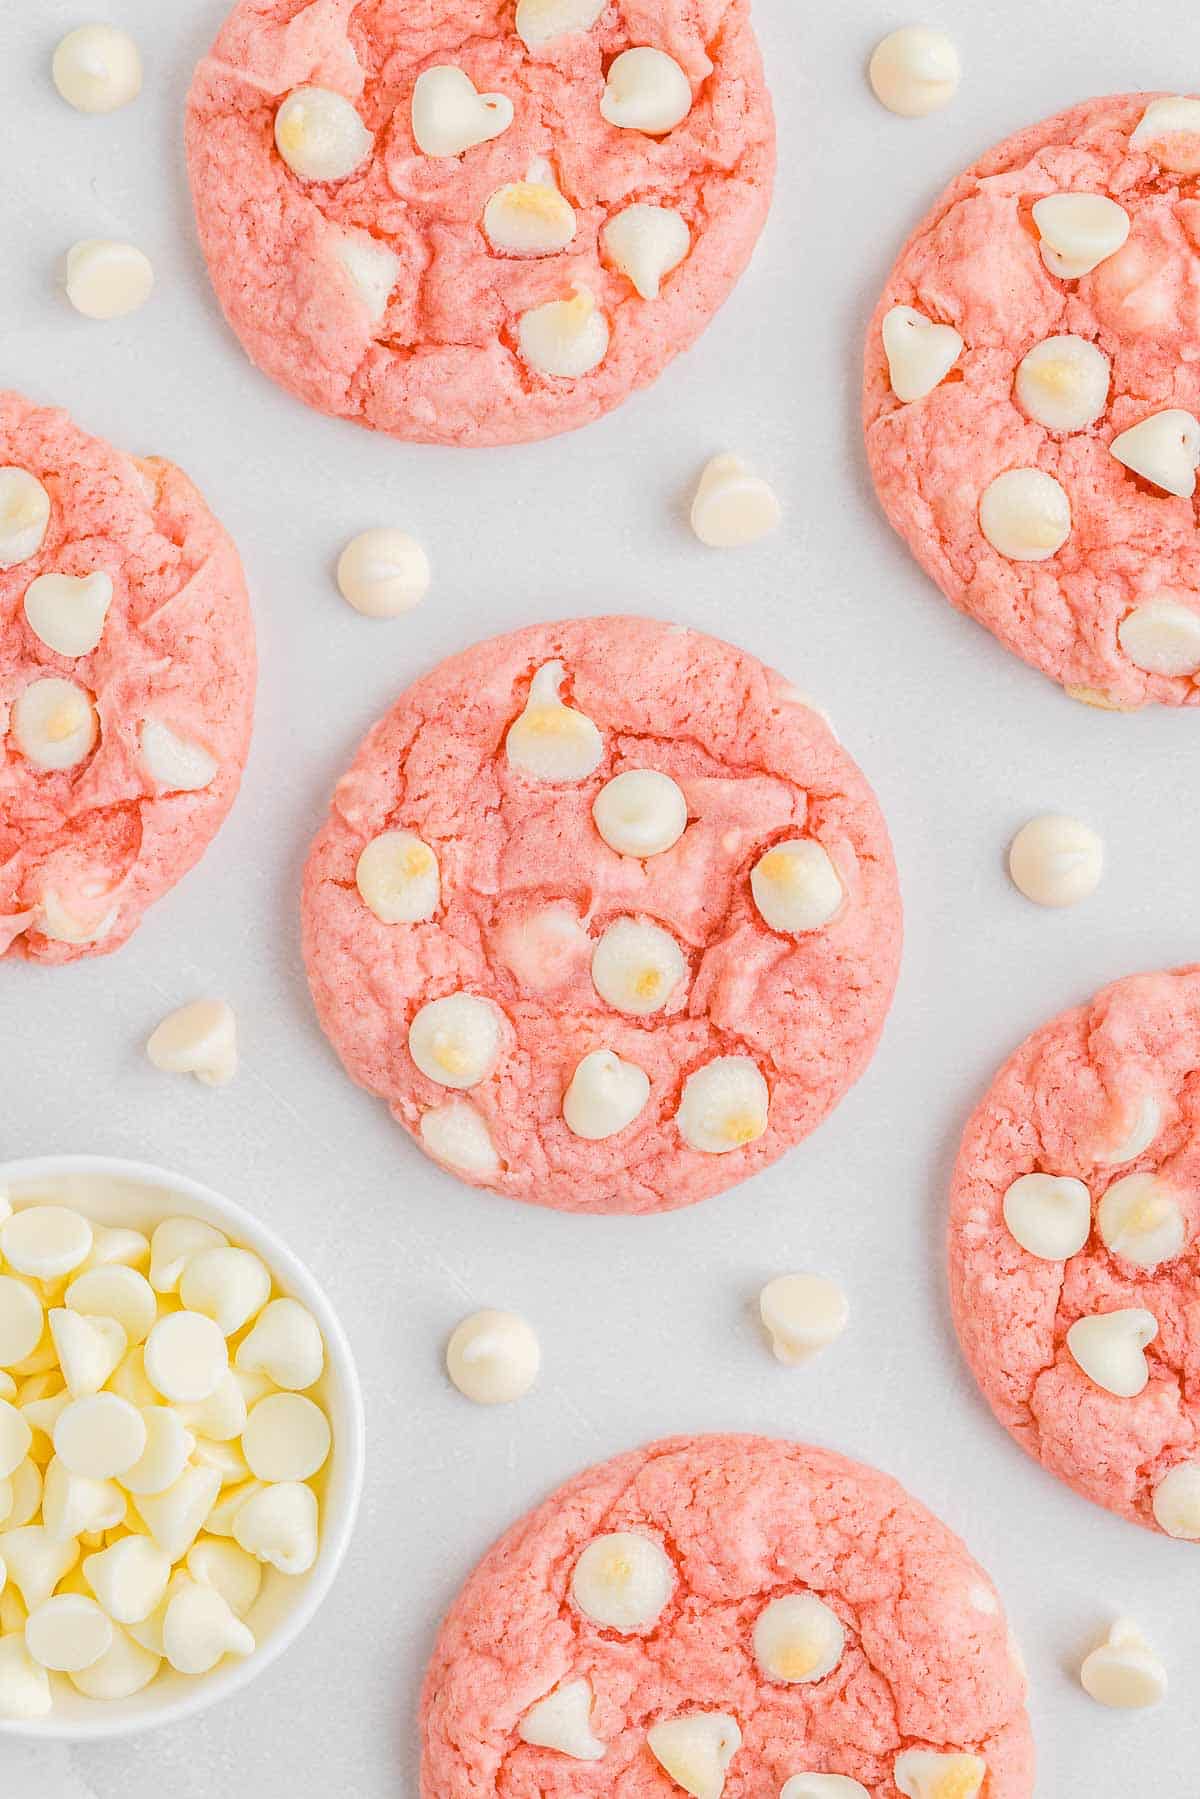 Strawberry cookies with white chocolate chips spread throughout.